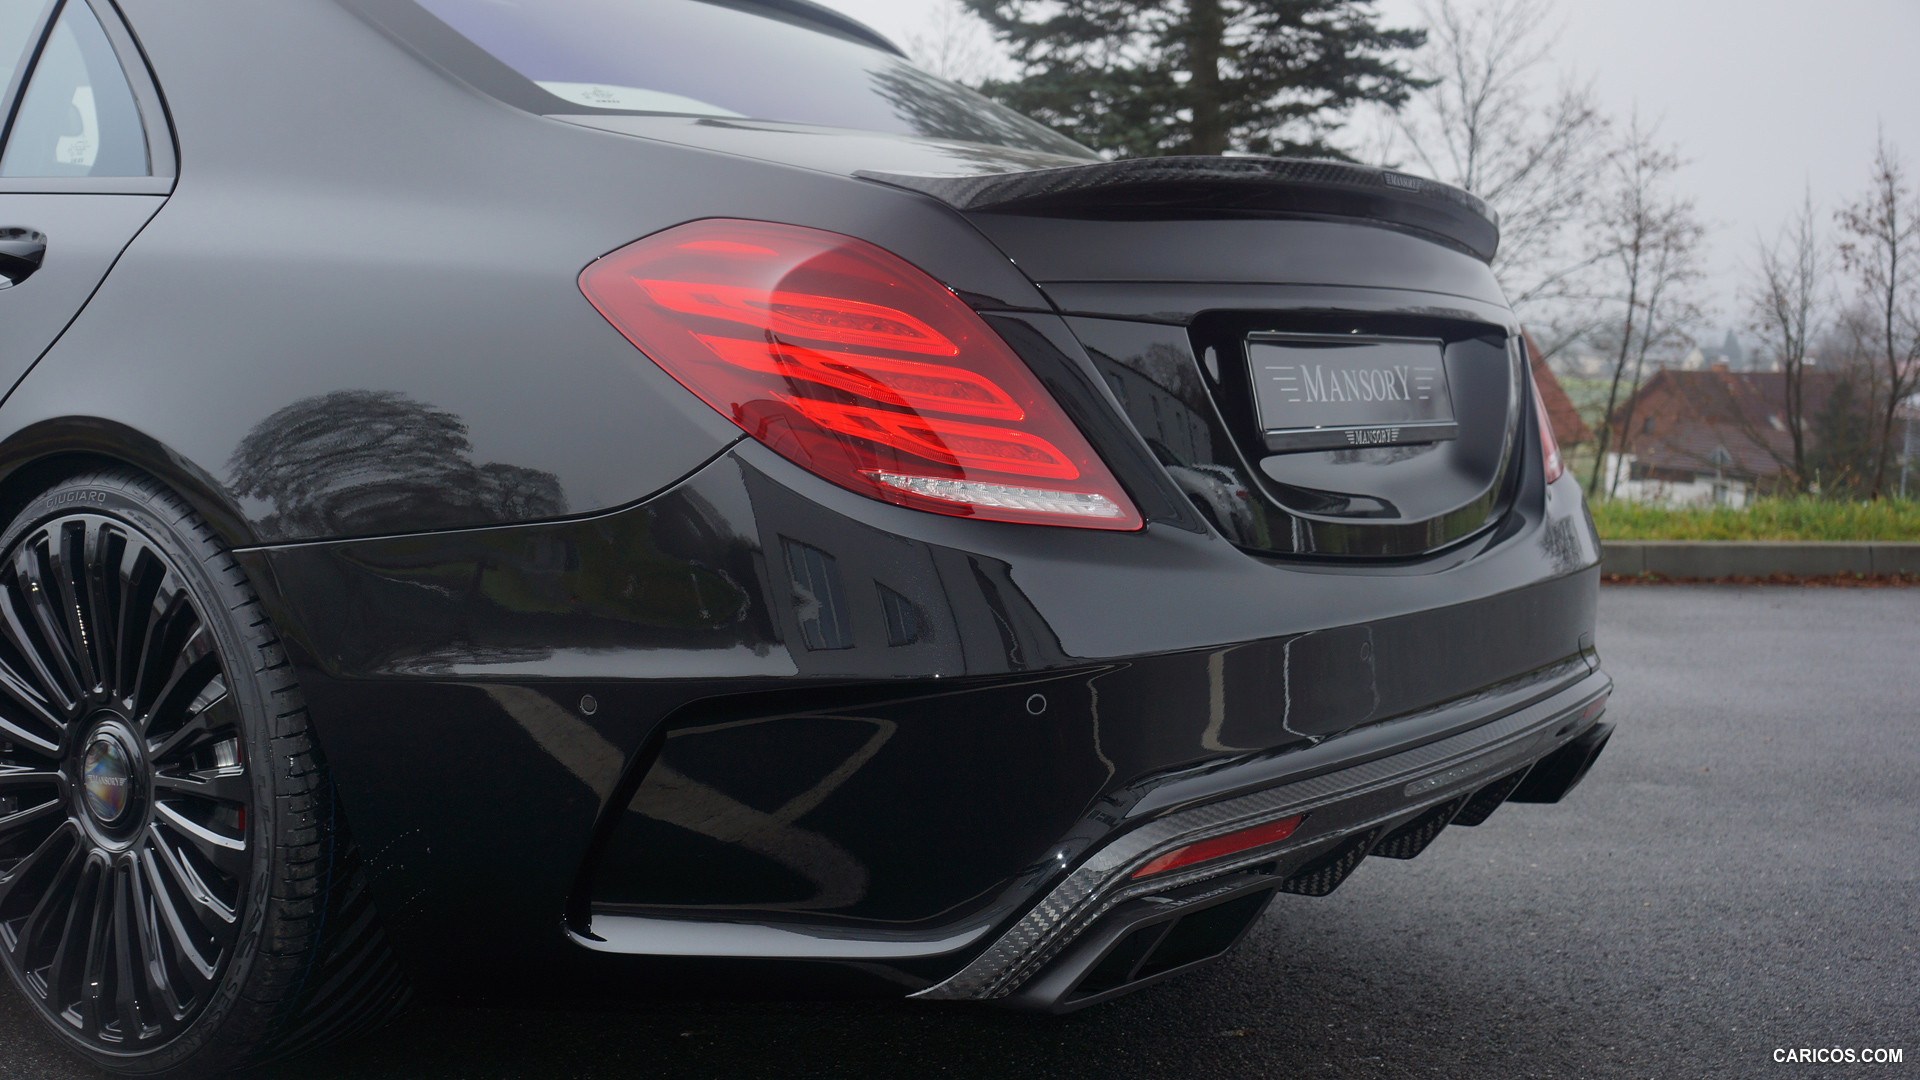 2015 Mansory Mercedes-Benz S63 AMG  - Rear, #9 of 17